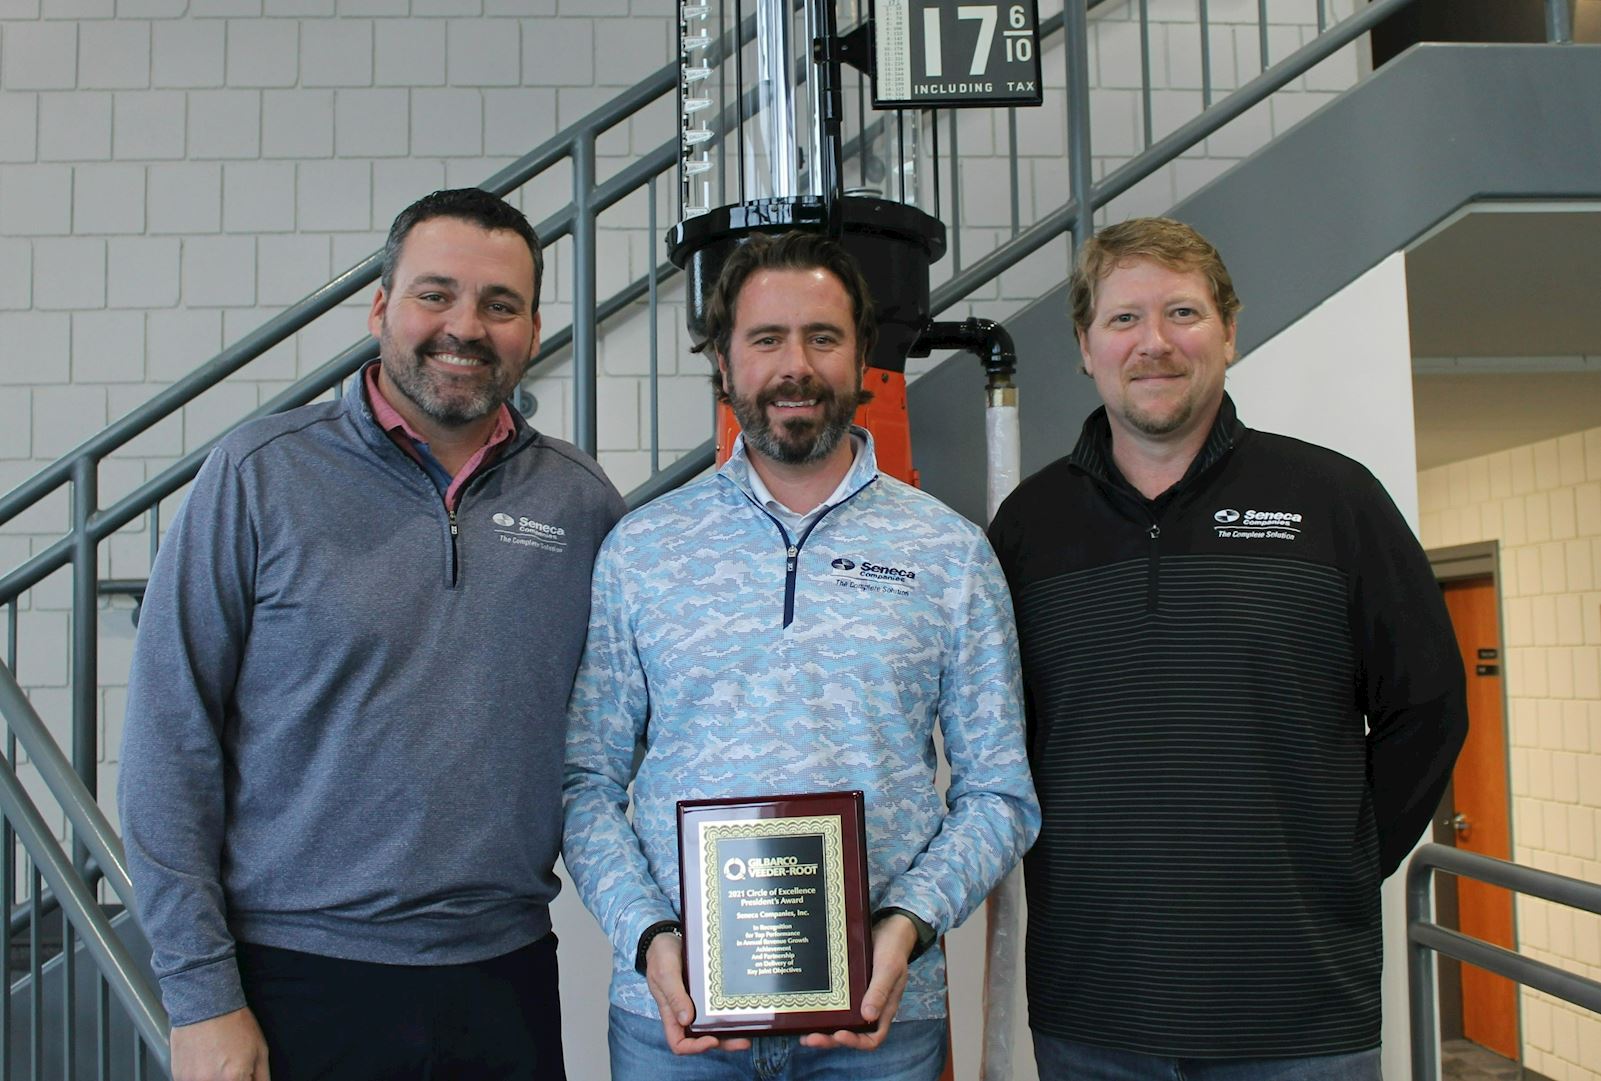 Seneca receives Distributor of the Year award from Gilbarco-Veeder Root